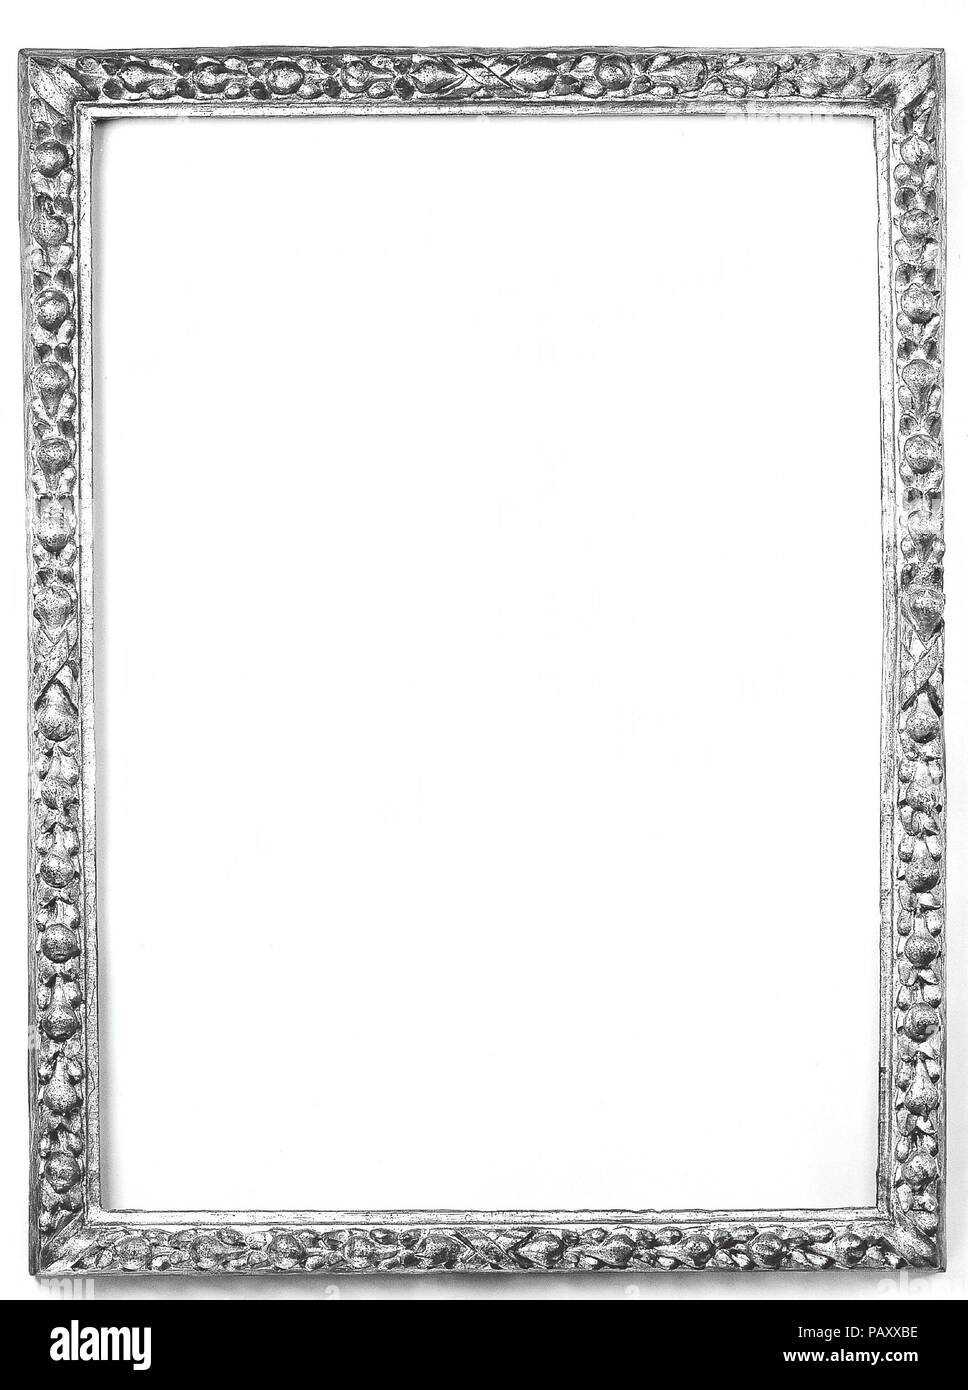 Astragal frame. Culture: Italian, Veneto. Dimensions: Overall: 29 x 39 1/4. Date: early 17th century. Museum: Metropolitan Museum of Art, New York, USA. Stock Photo